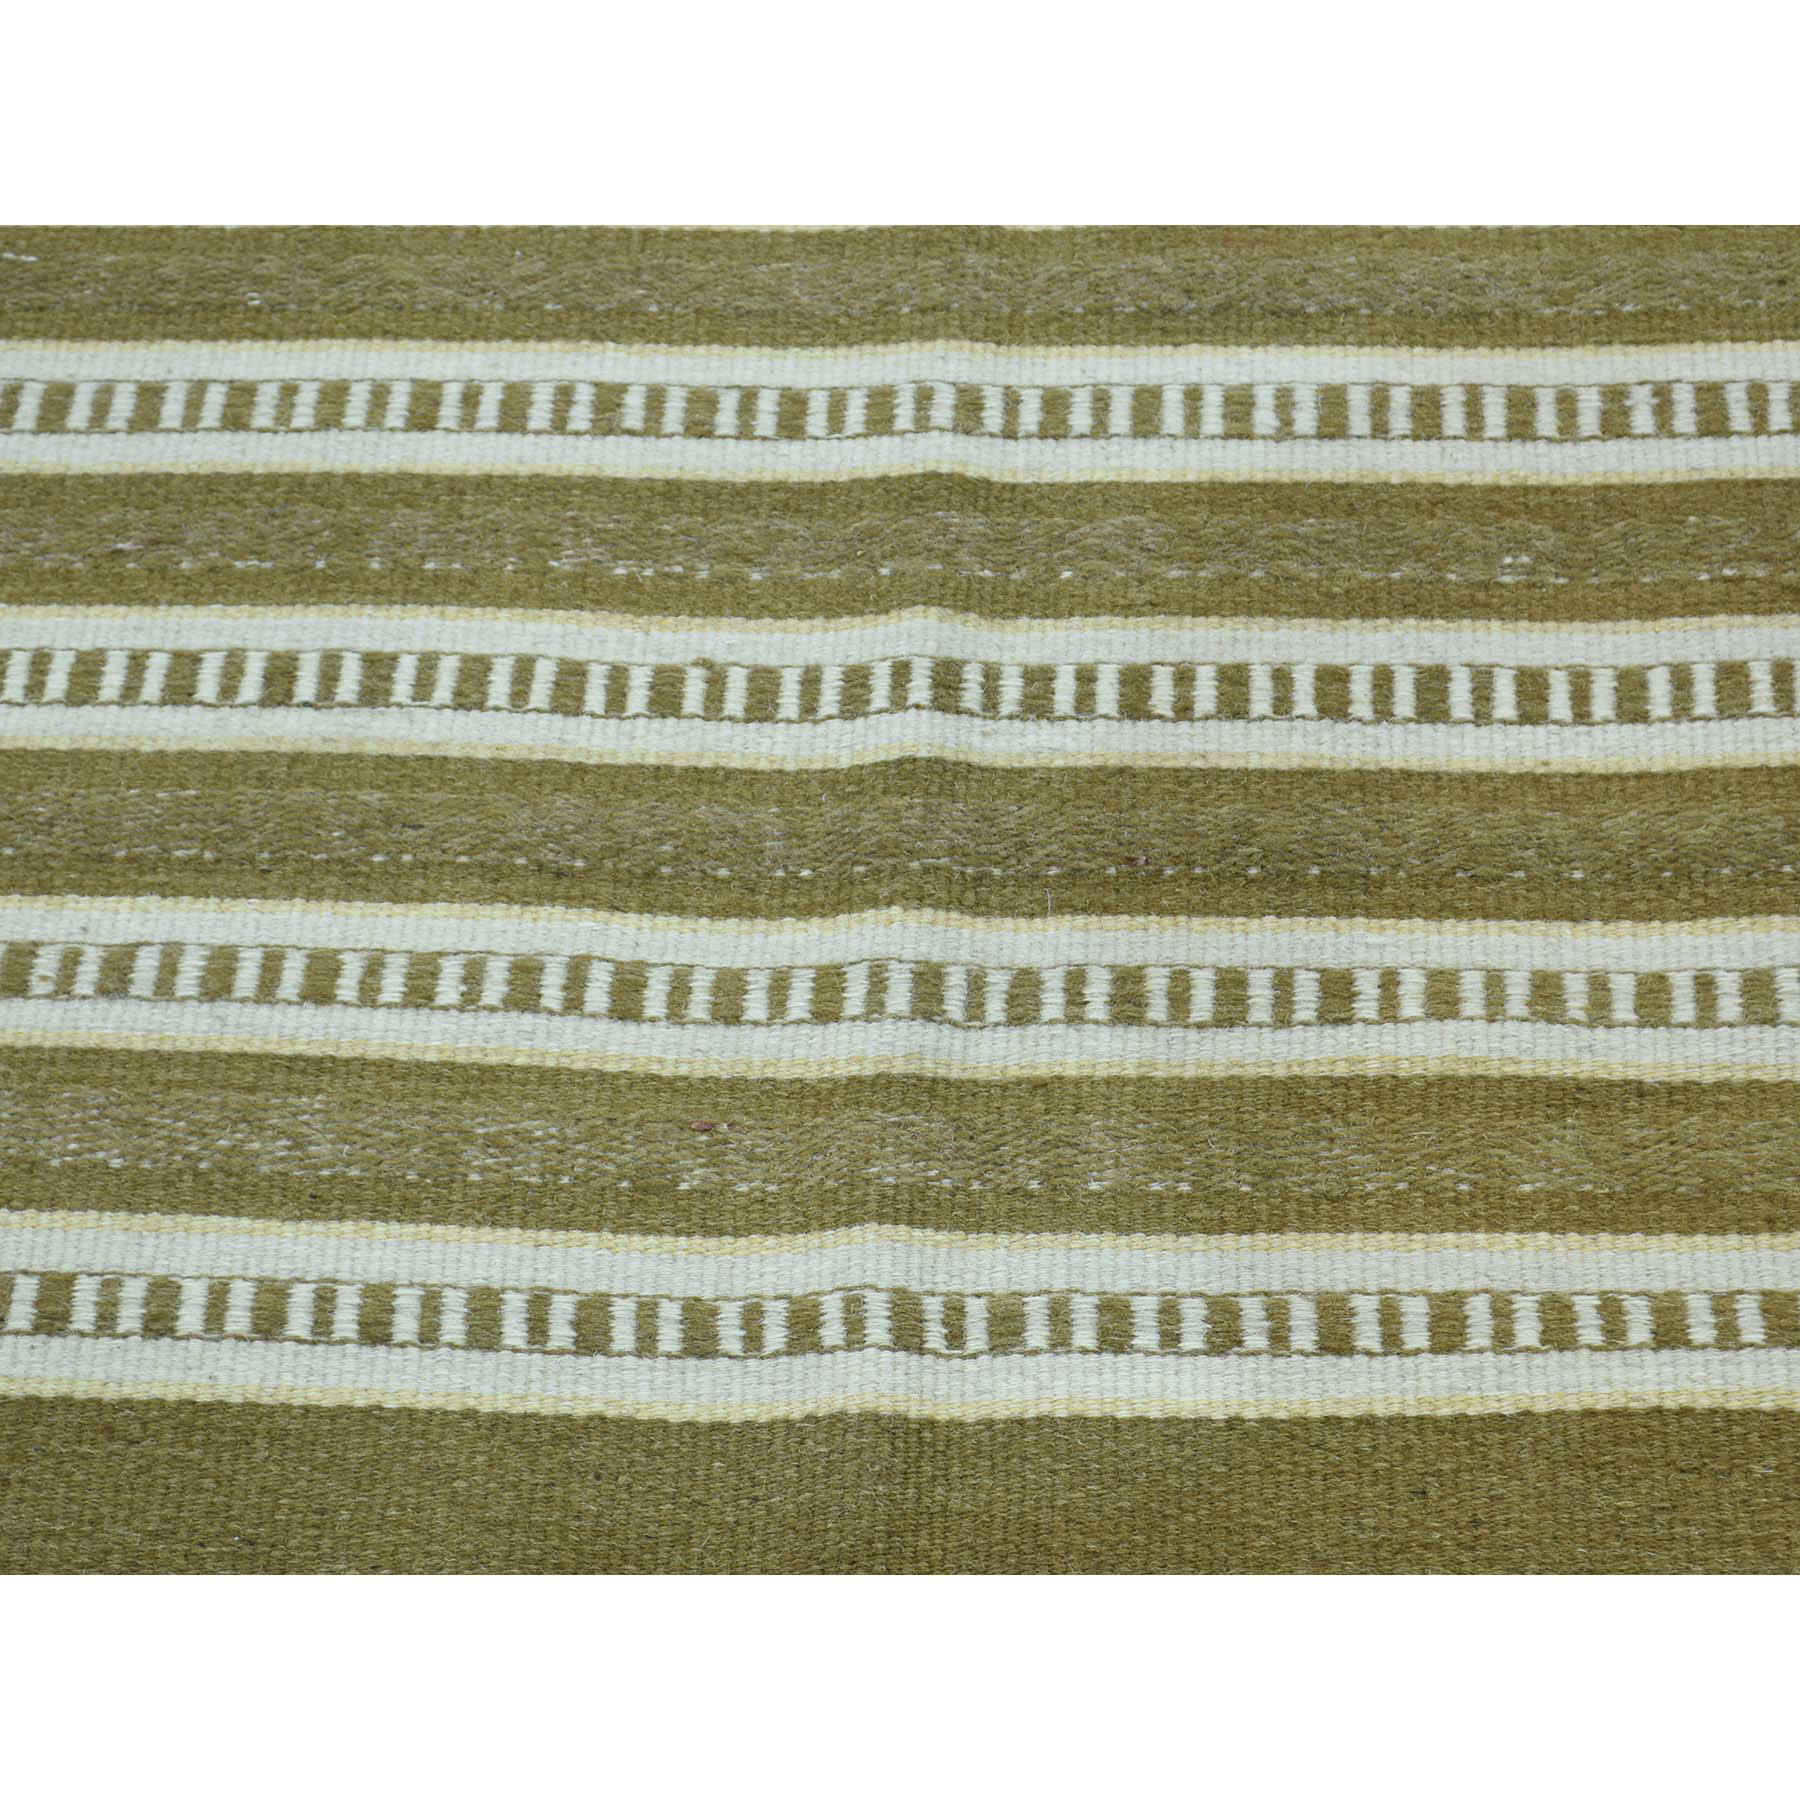 4-x6-2  Hand-Woven Striped Durie Kililm Flat Weave Oriental Rug 